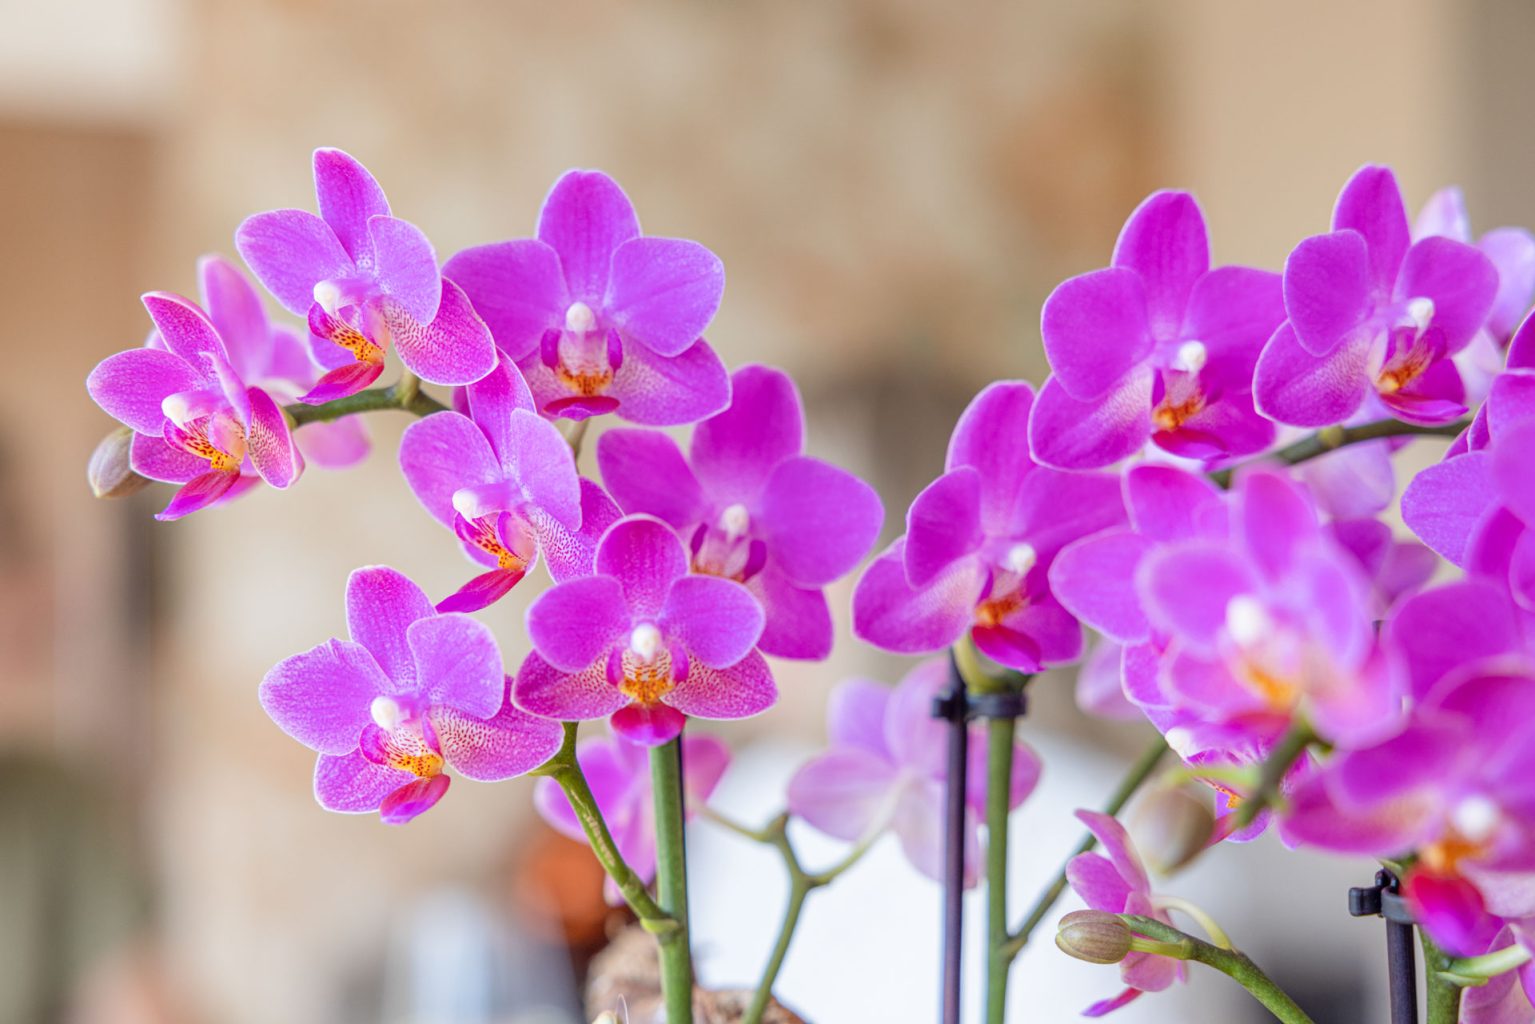 International Day of the Orchid